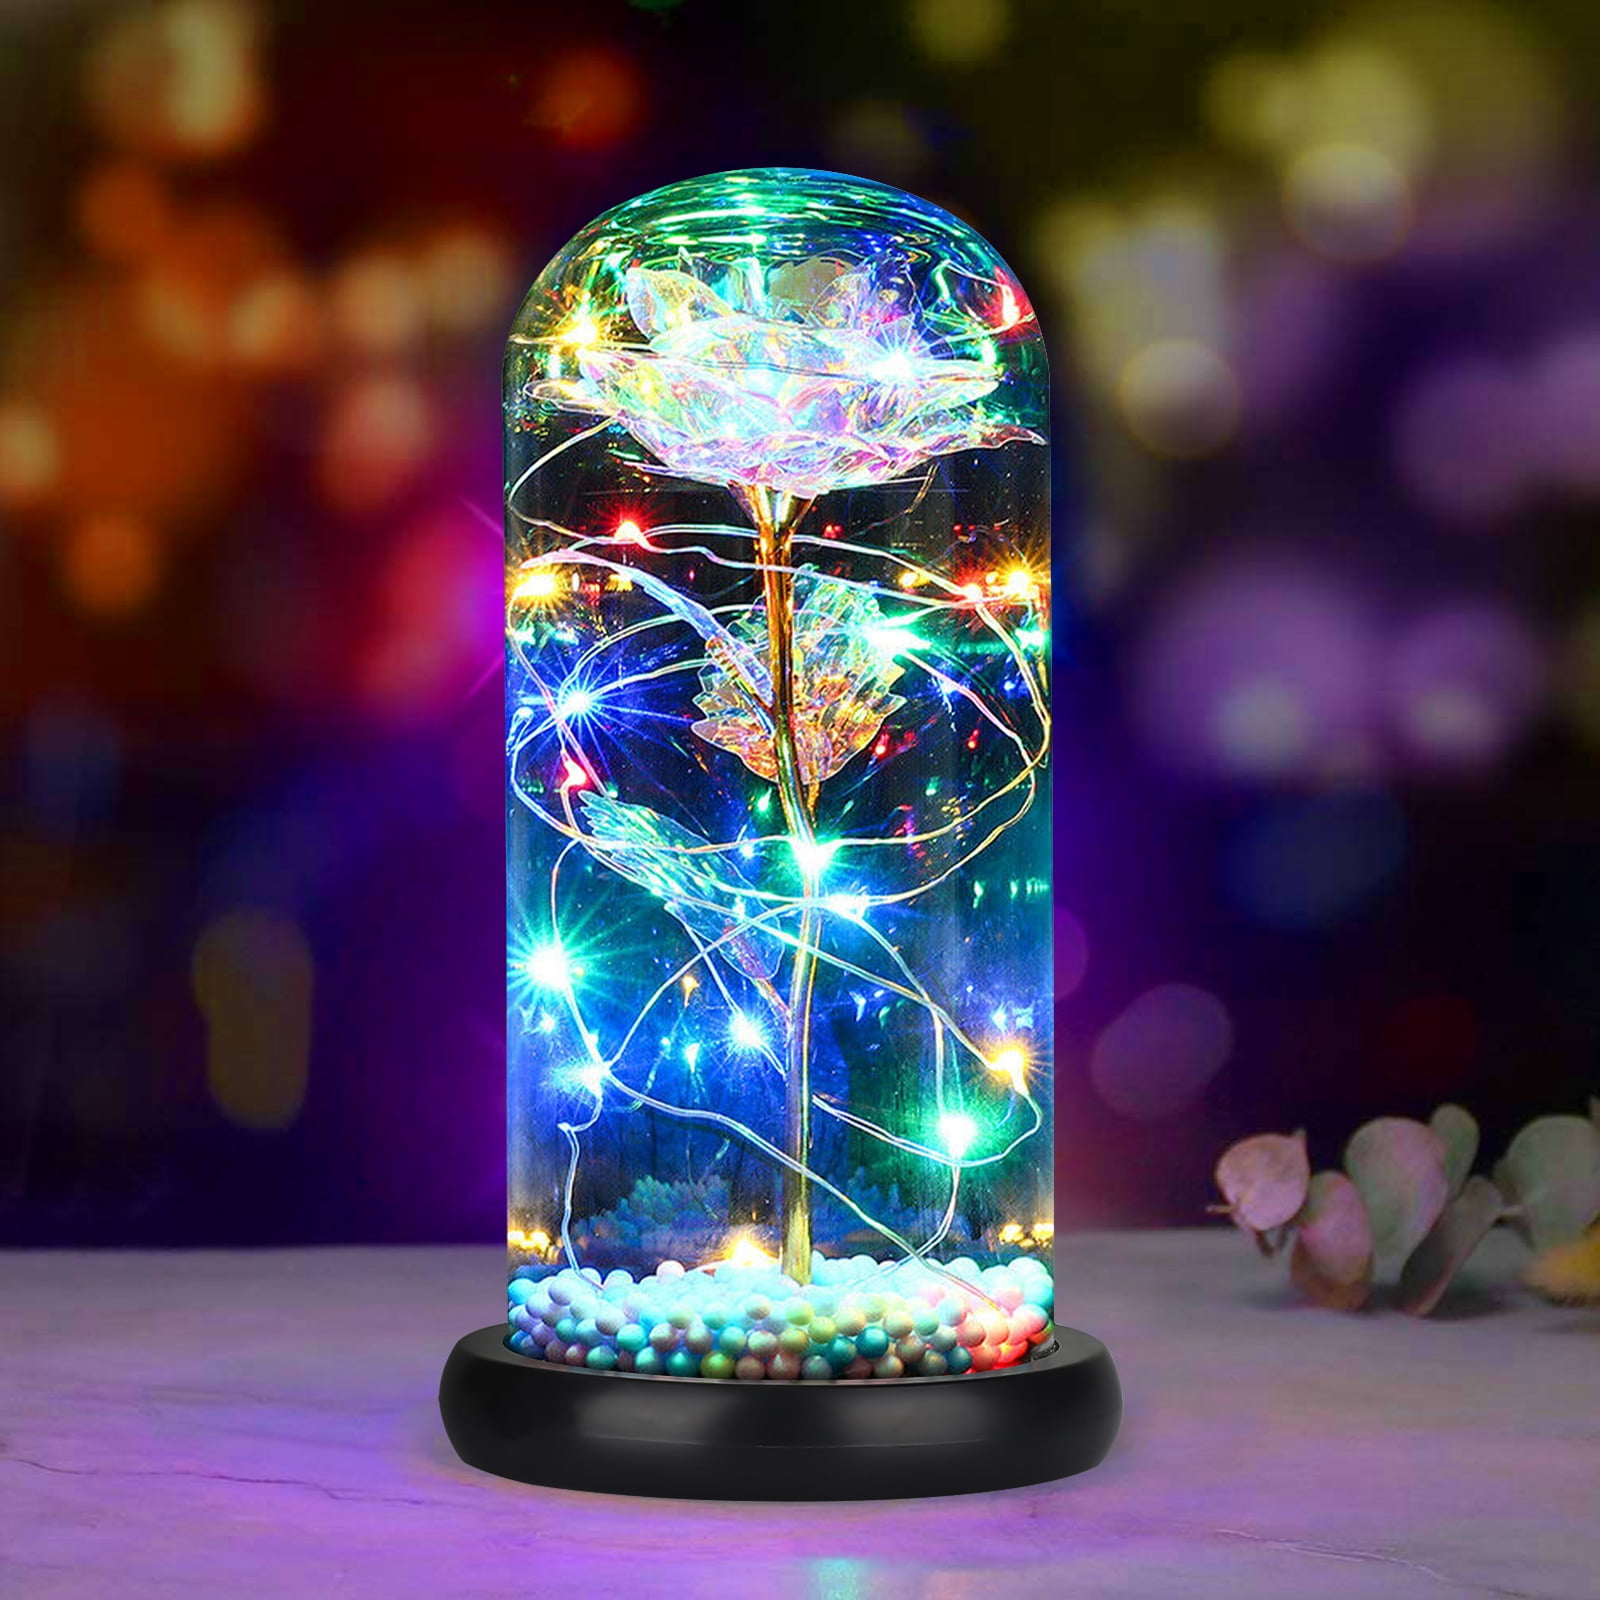 LED Galaxy Rose Flower With Fairy String Lights In Dome For Valentine's Day Gift 